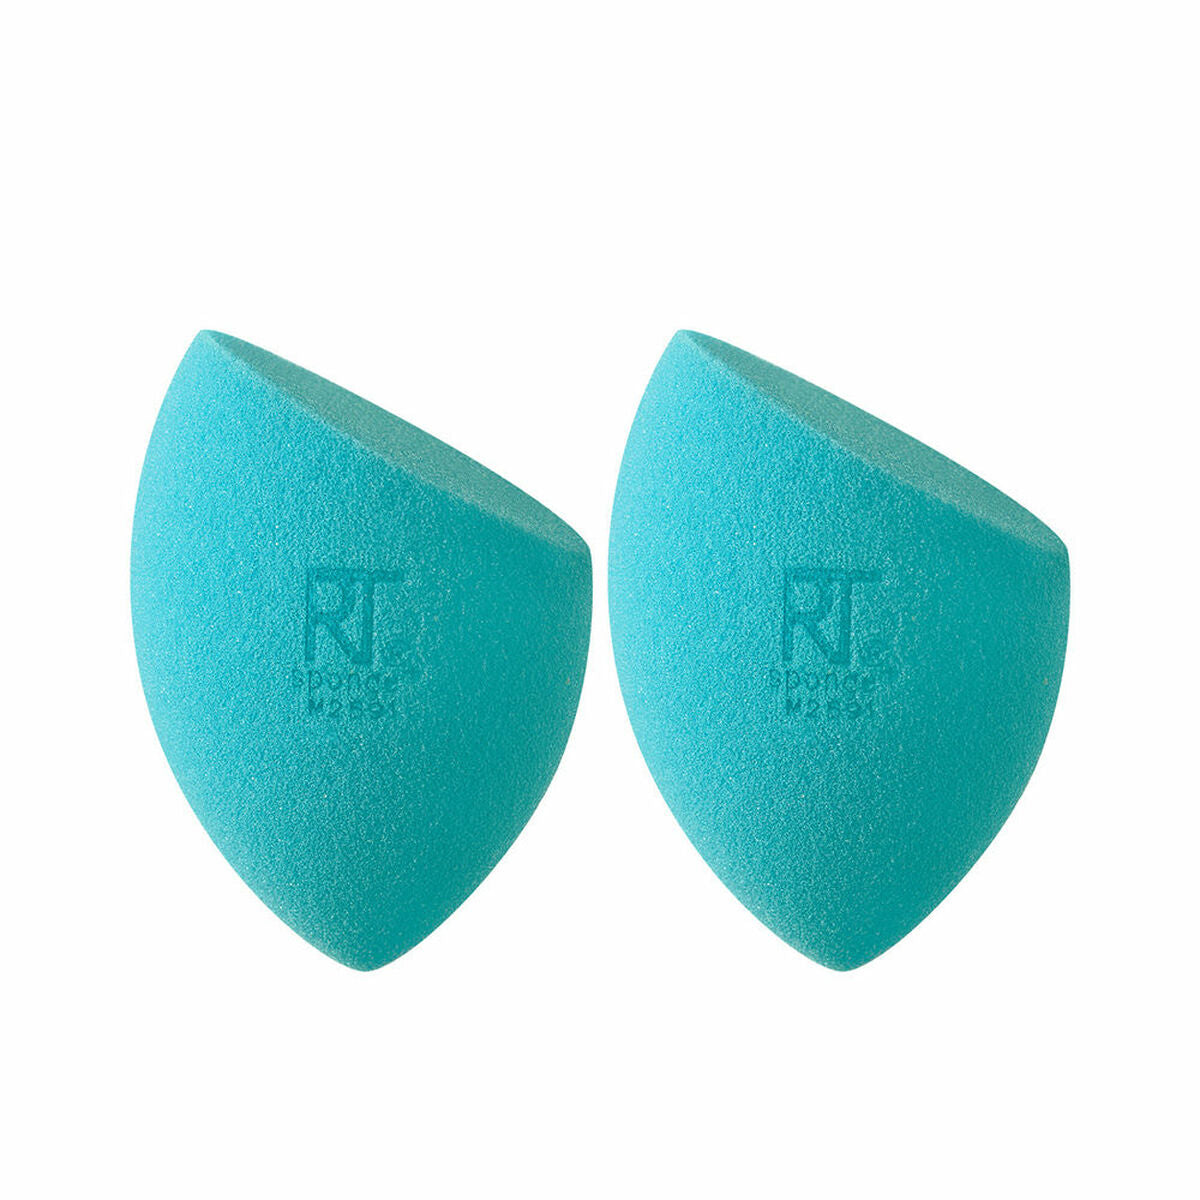 Make-up Sponge Real Techniques Miracle Airblend Blue (2 Units)-0